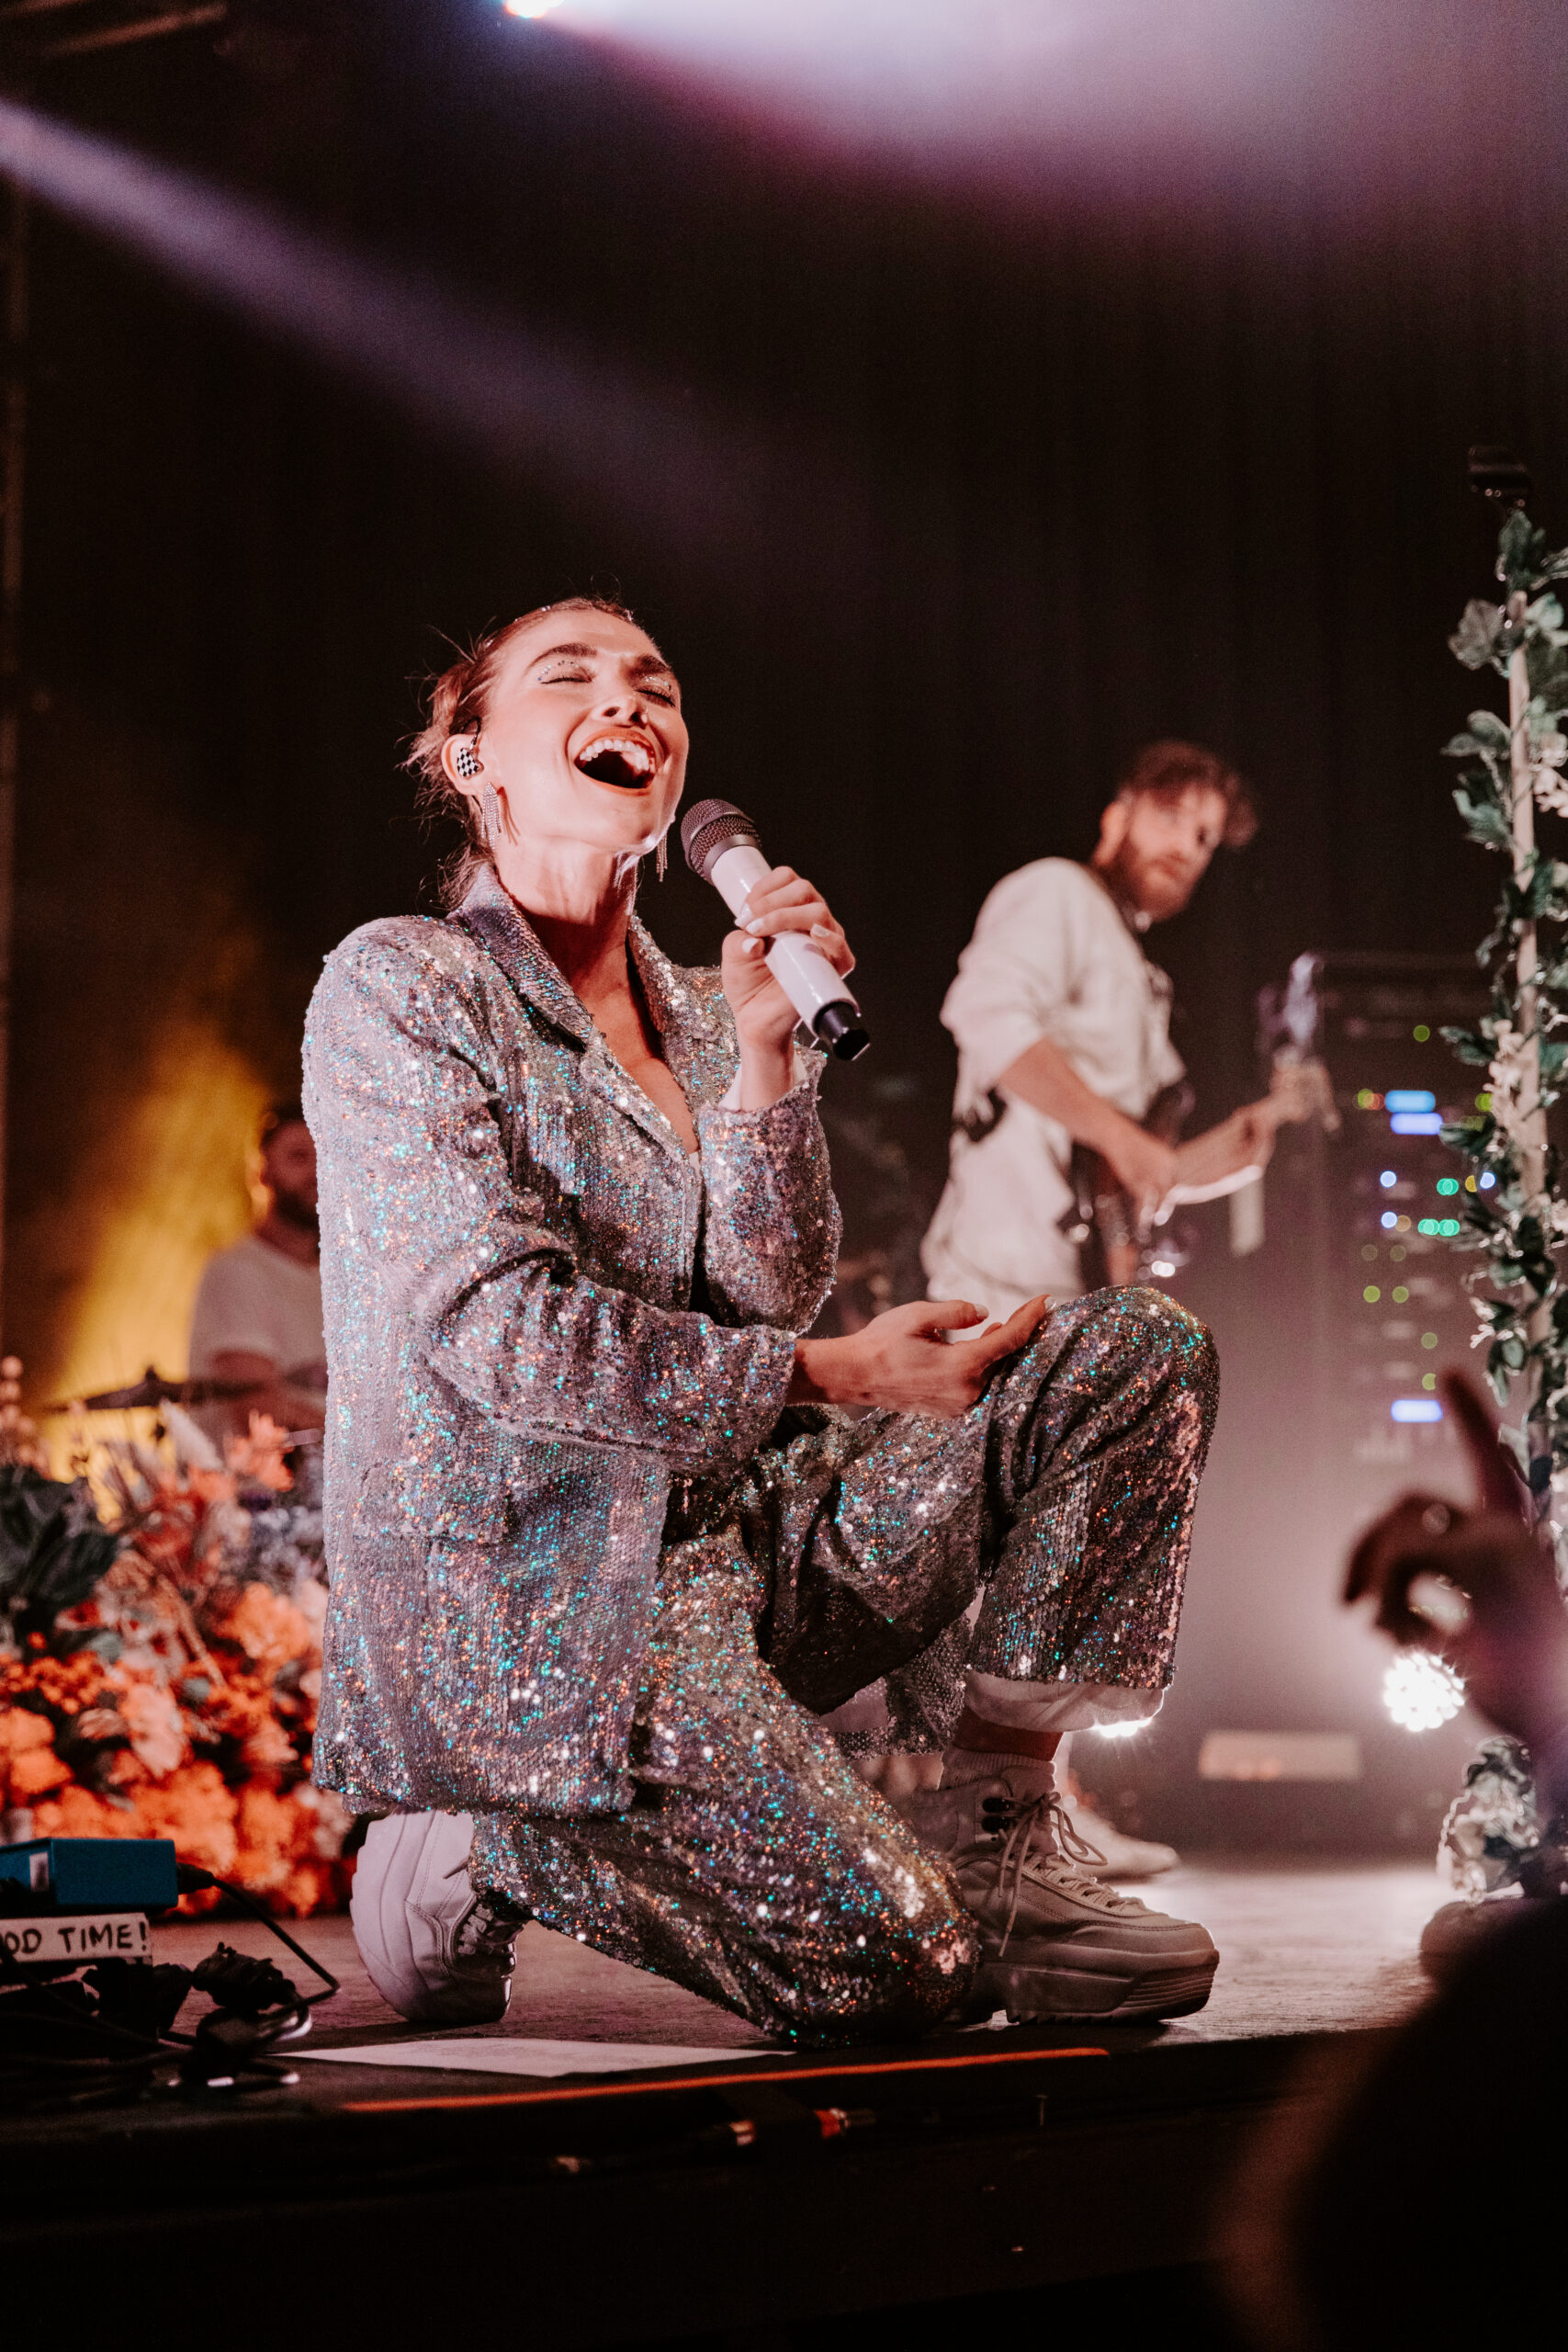 Misterwives performing at The Granada Theater in Dallas, TX